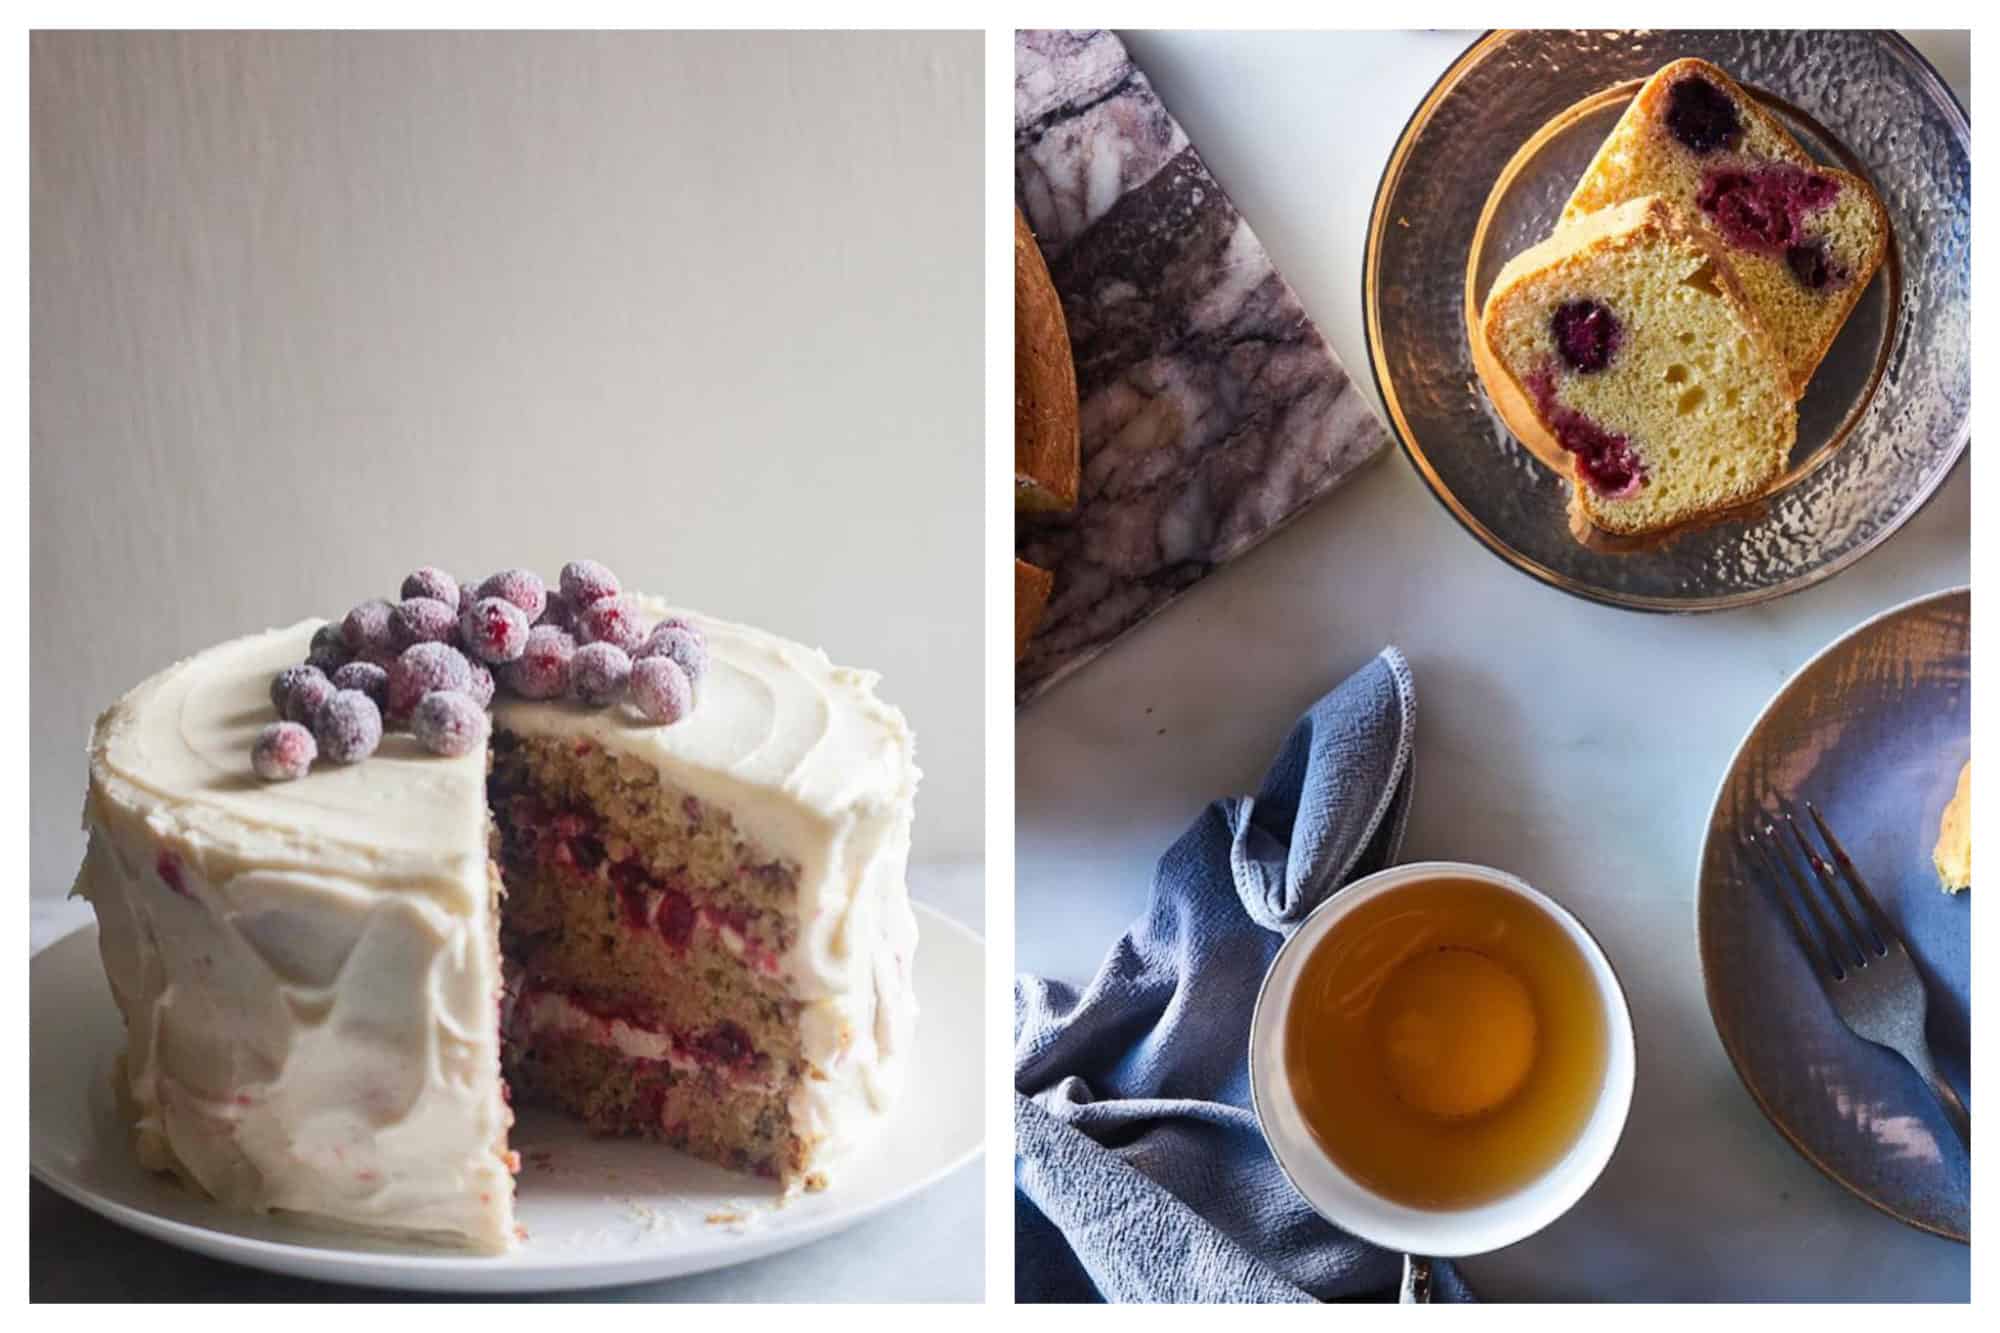 On left: A towering, generously-frosted cranberry and parsnip cake is illuminated by the soft window light. On right: It's tea time, complete with thick, soft slices of Italian berry cake. 